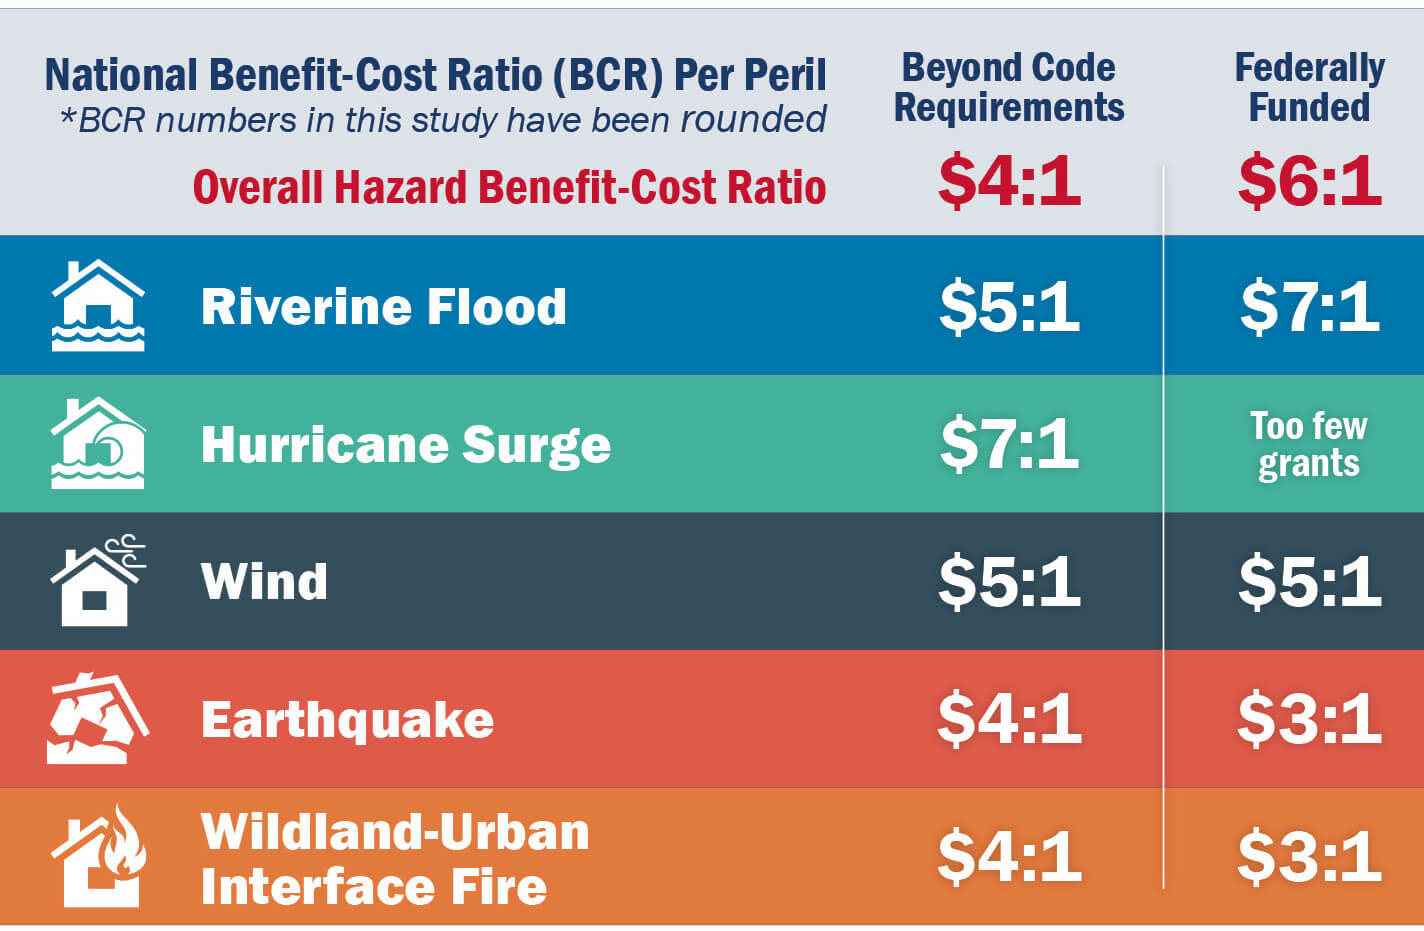 Overall national hazard benefit-cost ratio for federally funded mitigation measures